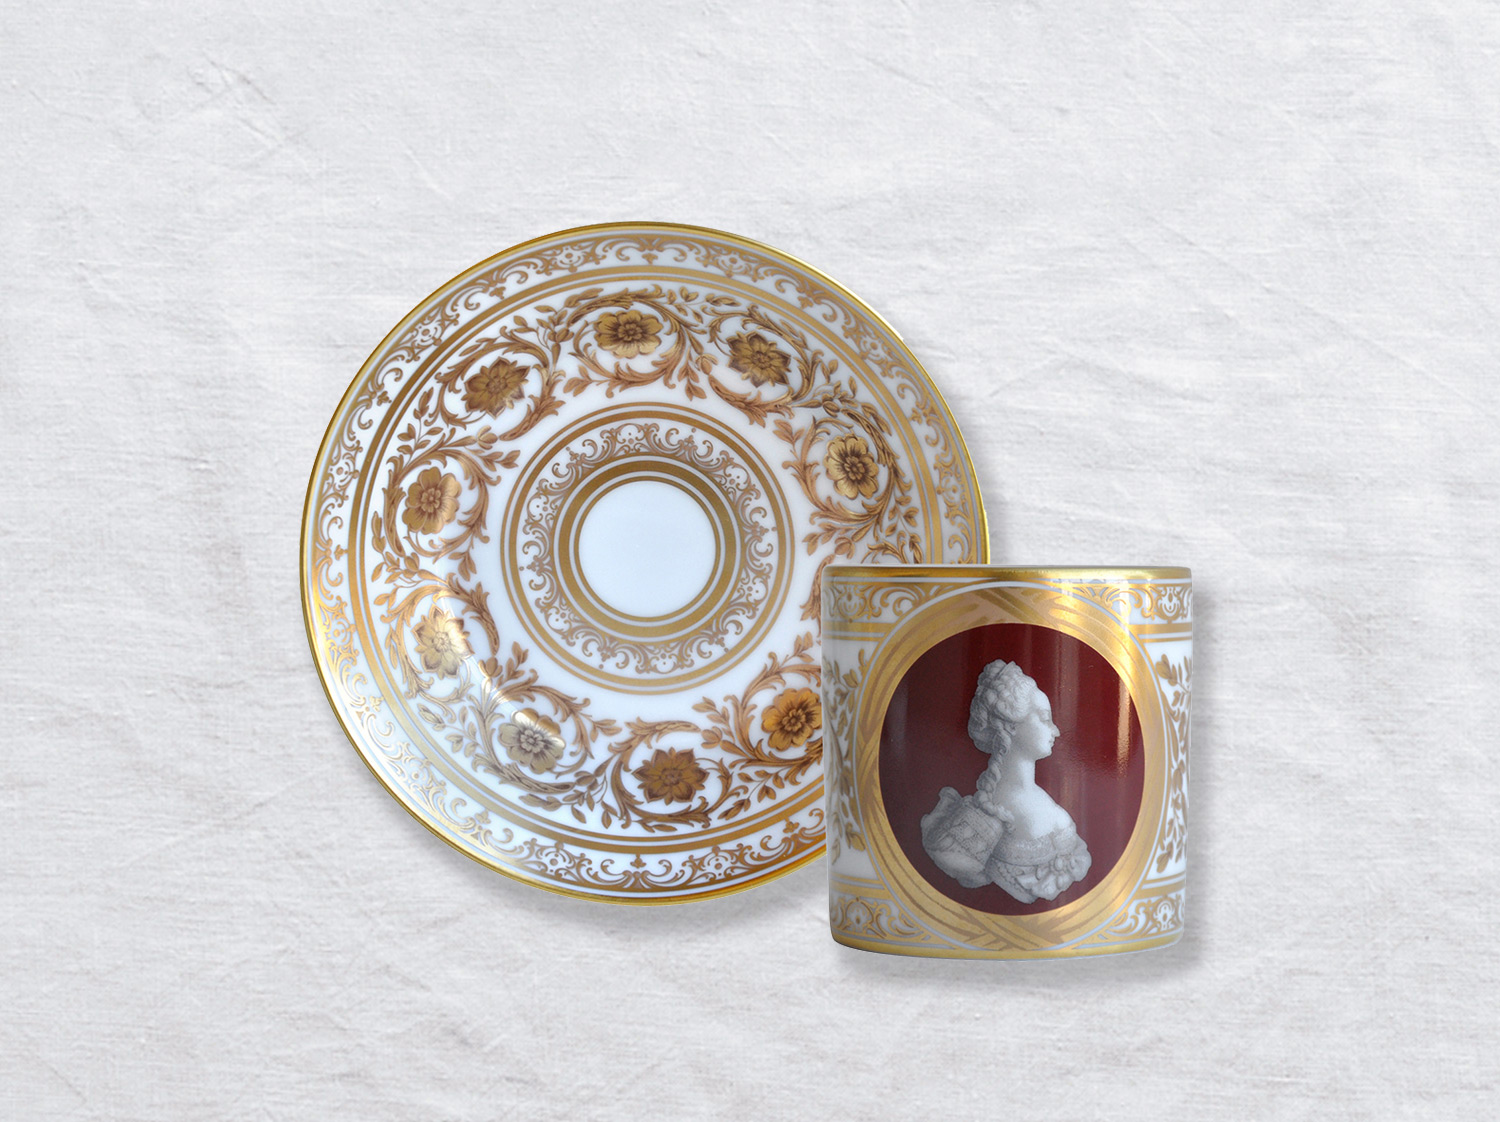 China Litron cup & saucer of the collection A LA REINE MARIE-ANTOINETTE | Bernardaud